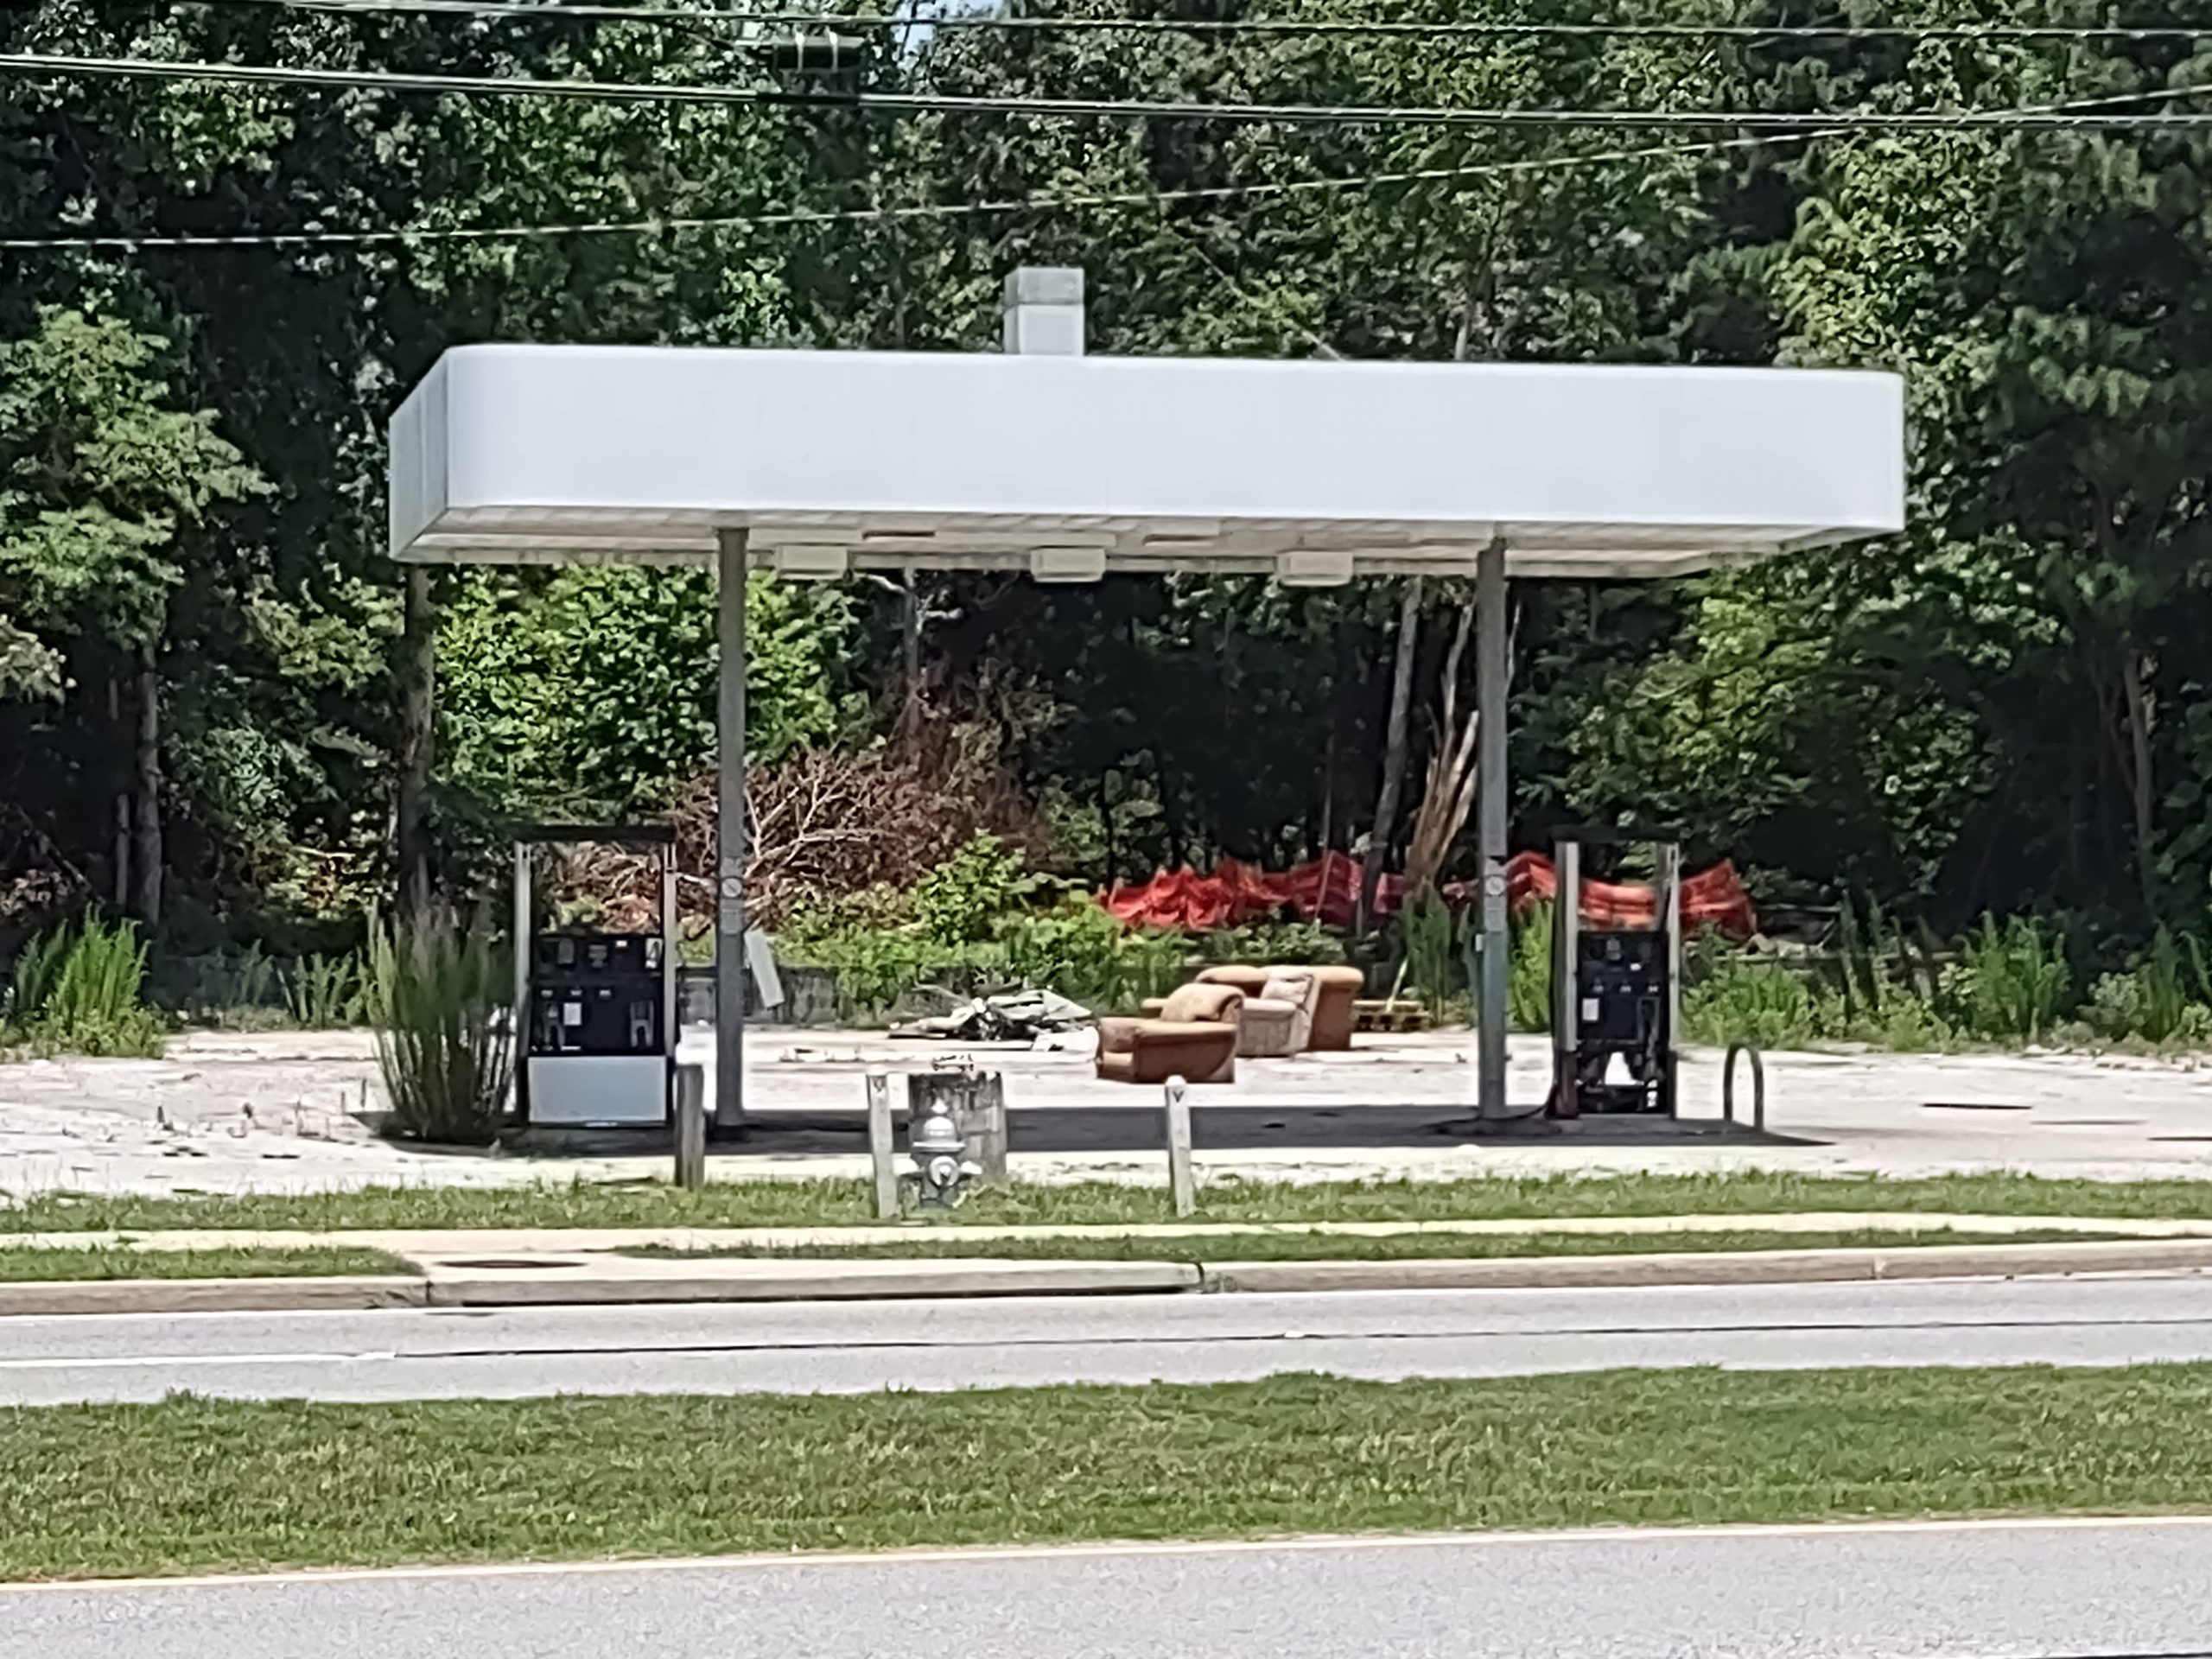 Picture of the abandoned gas pumps, awning, and couches that inspired the post.